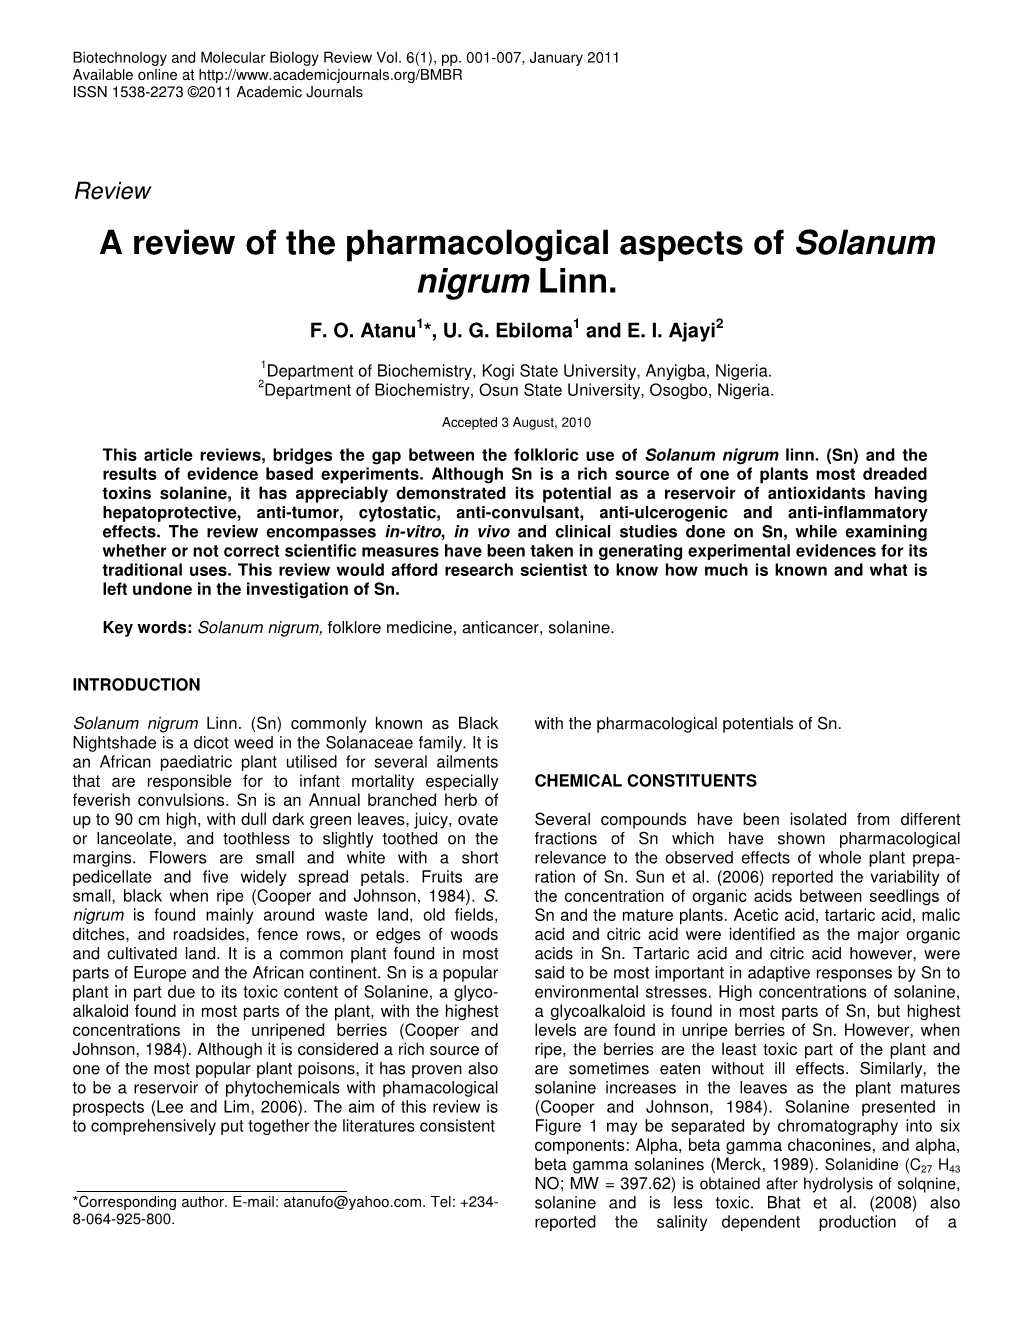 A Review of the Pharmacological Aspects of Solanum Nigrum Linn